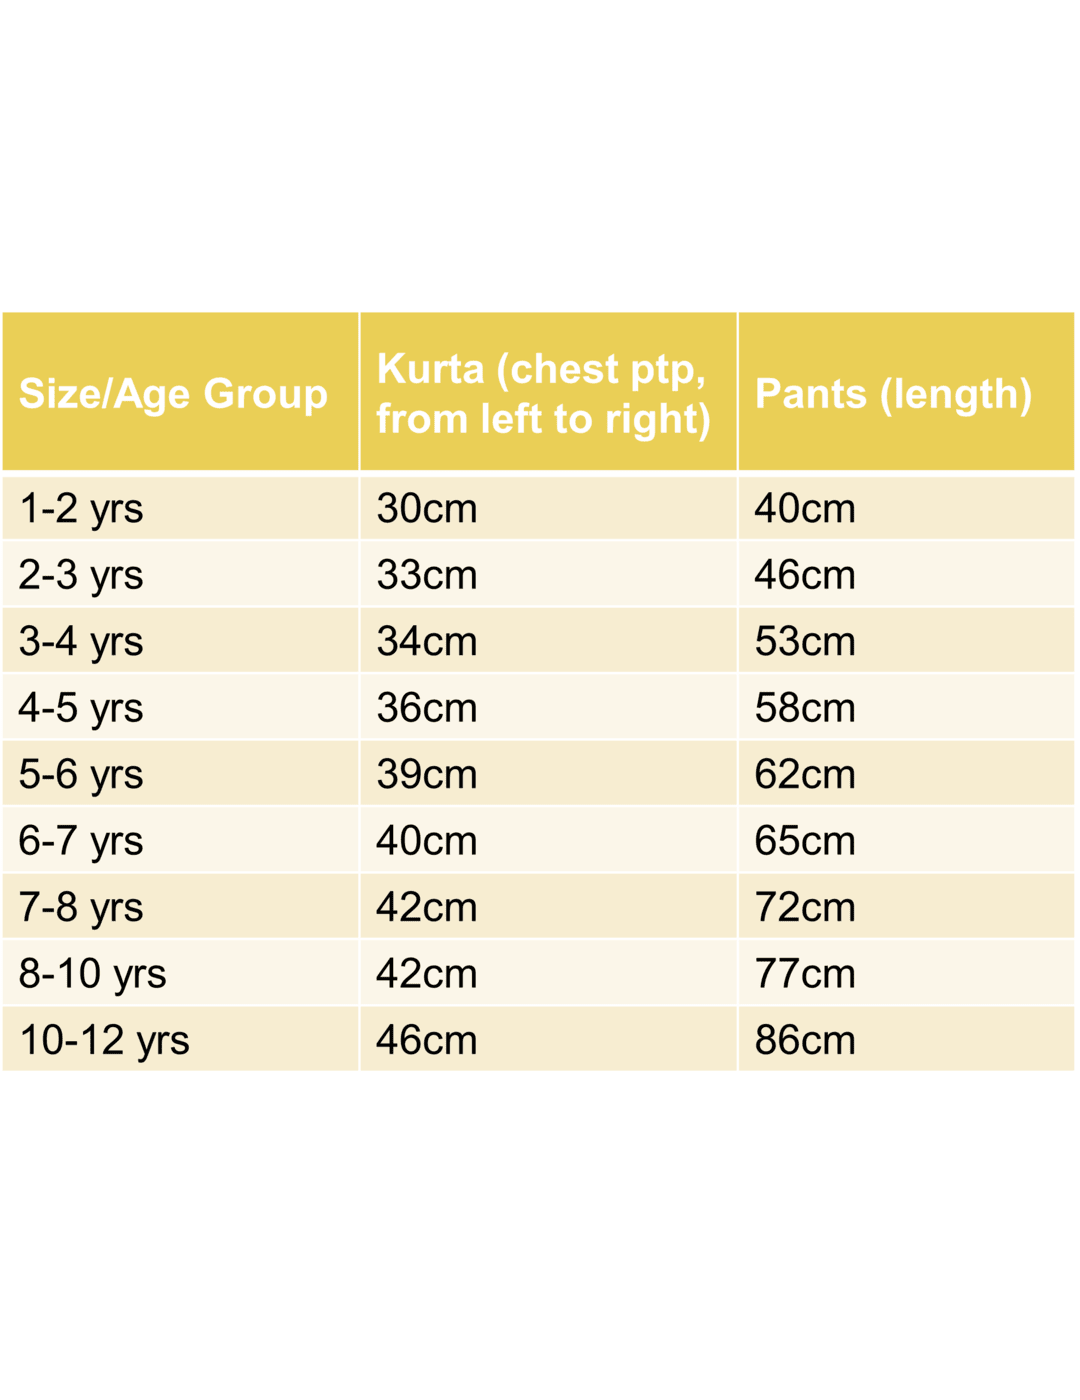 Where to buy cheap baby clothes in Singapore